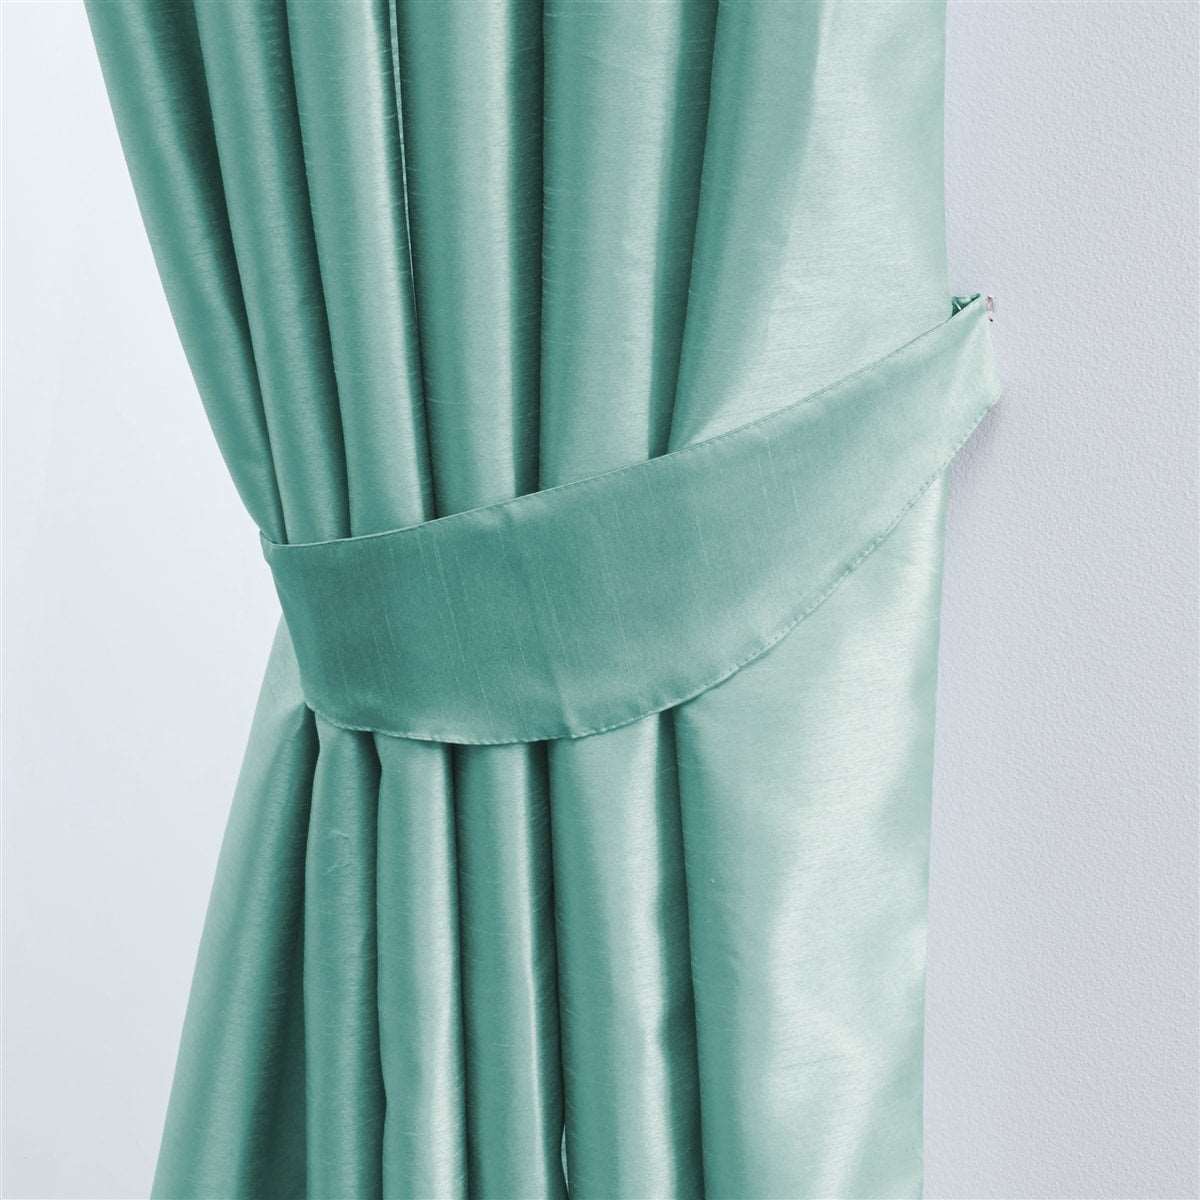 Faux Silk Tape Top Fully Lined Curtains (Duck Egg)